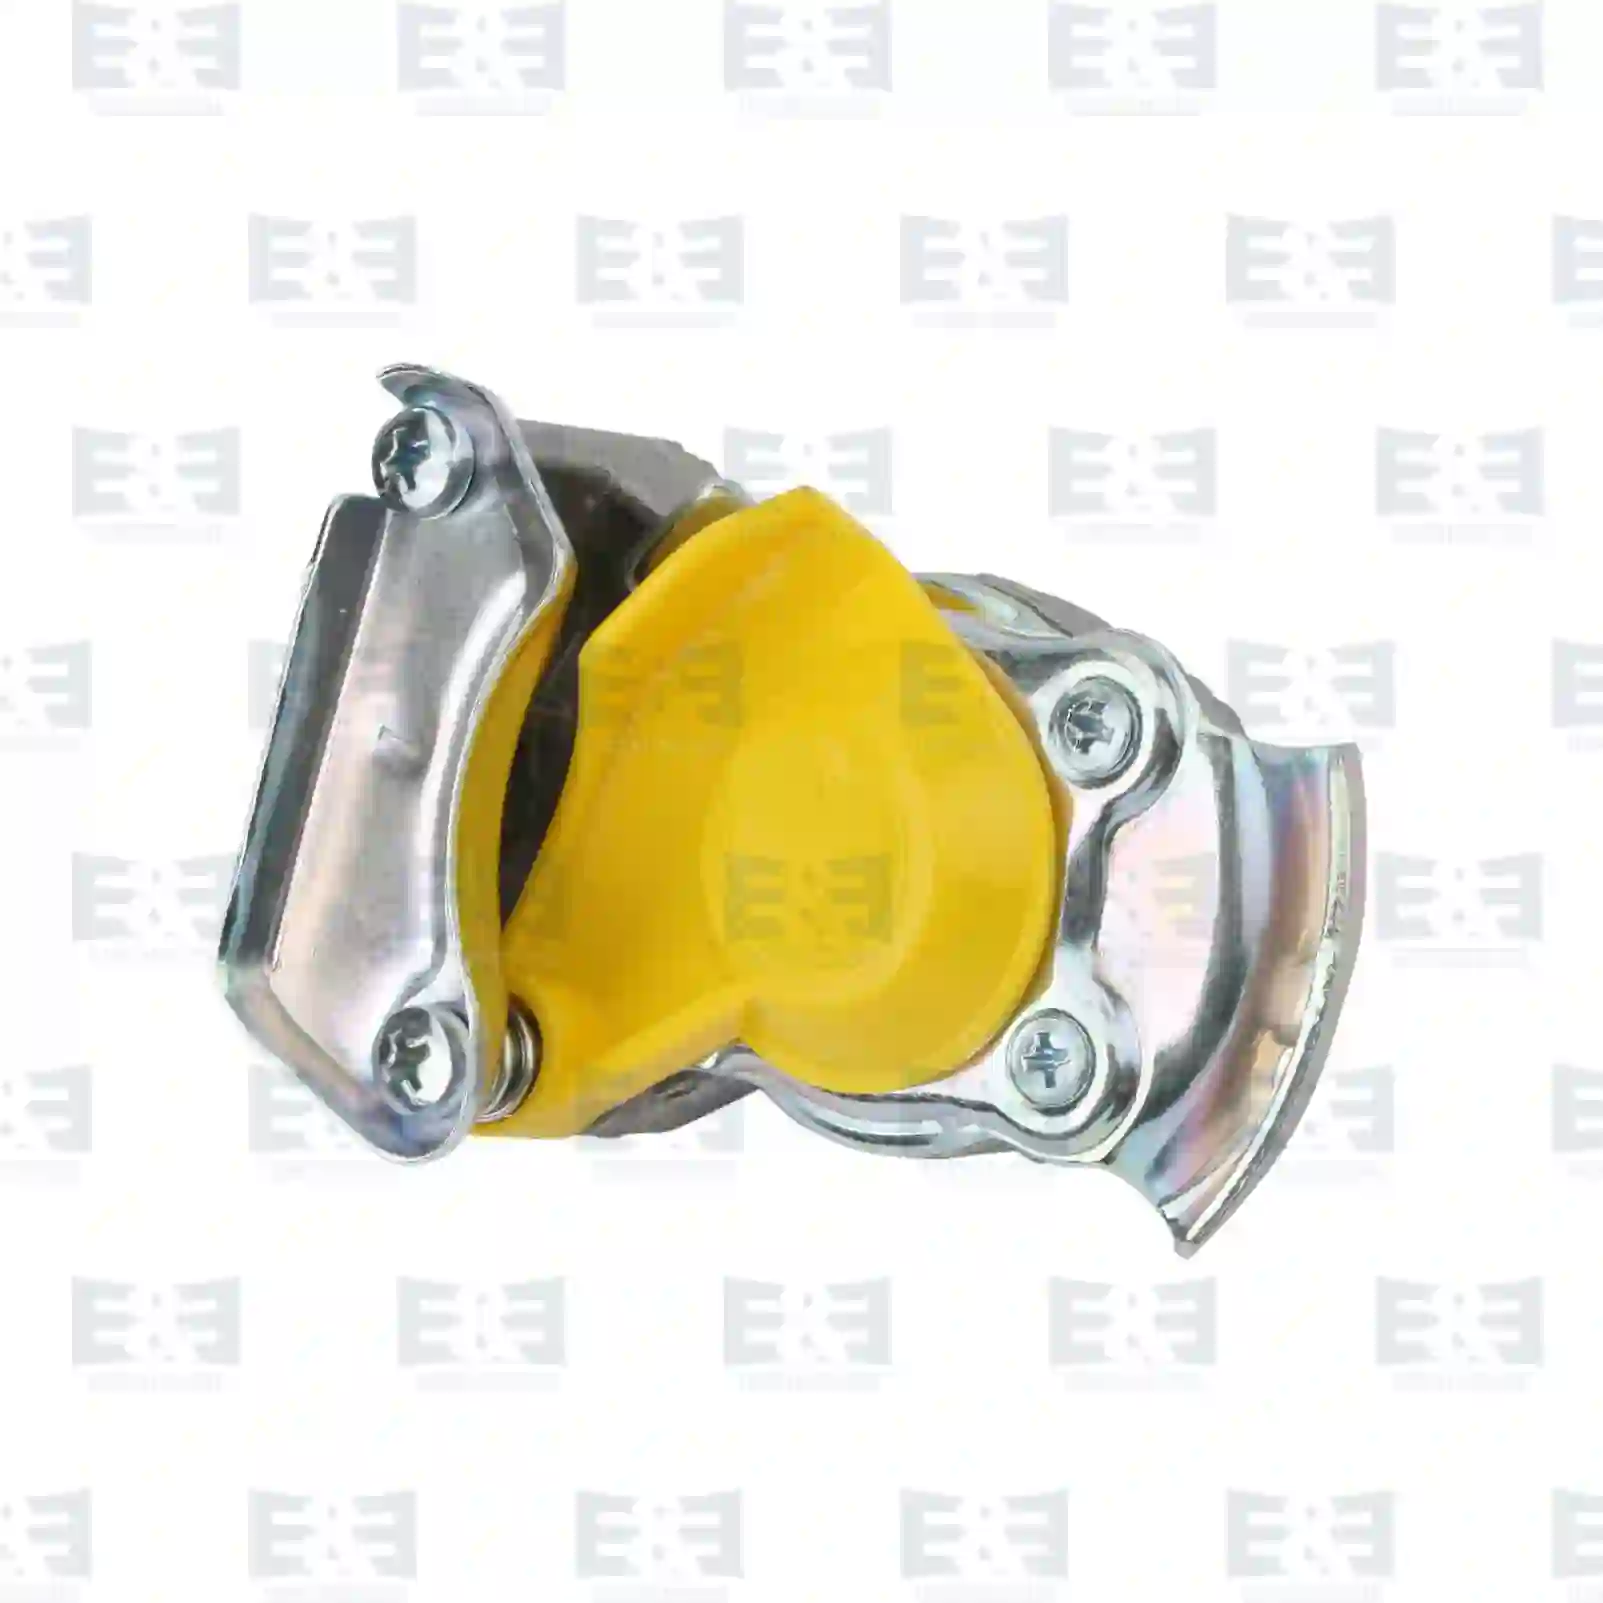 Palm Coupling Palm coupling, yellow lid, EE No 2E2296692 ,  oem no:605205100, 0218240400, 0031200, 1506436, 1642263, 31200, 868141, 868142, ACU8710, 02379560, 02516345, 02516835, 02516904, 02521365, 41035633, 41035634, 5006210386, 60135772, 61259650, 61259651, A2342200, CF3505858, 150880, 02379560, 02516345, 02516835, 02516904, 02521365, 2379560, 2516345, 2516835, 2516904, 2521365, 41035634, 61259651, 182796, 500945000, 945000, 502966708, 502966777, 502998301, 81512206038, 81512206040, 81512206043, 81512206067, 81512206071, 81512206076, 81512206127, 0004293830, 0004295130, 0004295430, 0004295930, 0004297930, 0004299530, F001009, 0037534500, 5000608012, 5021170410, 4425012200, 1112486, 1912280, 20167486, 330302, 051425, 8285192000, 1568341, ZG50553-0008 E&E Truck Spare Parts | Truck Spare Parts, Auotomotive Spare Parts